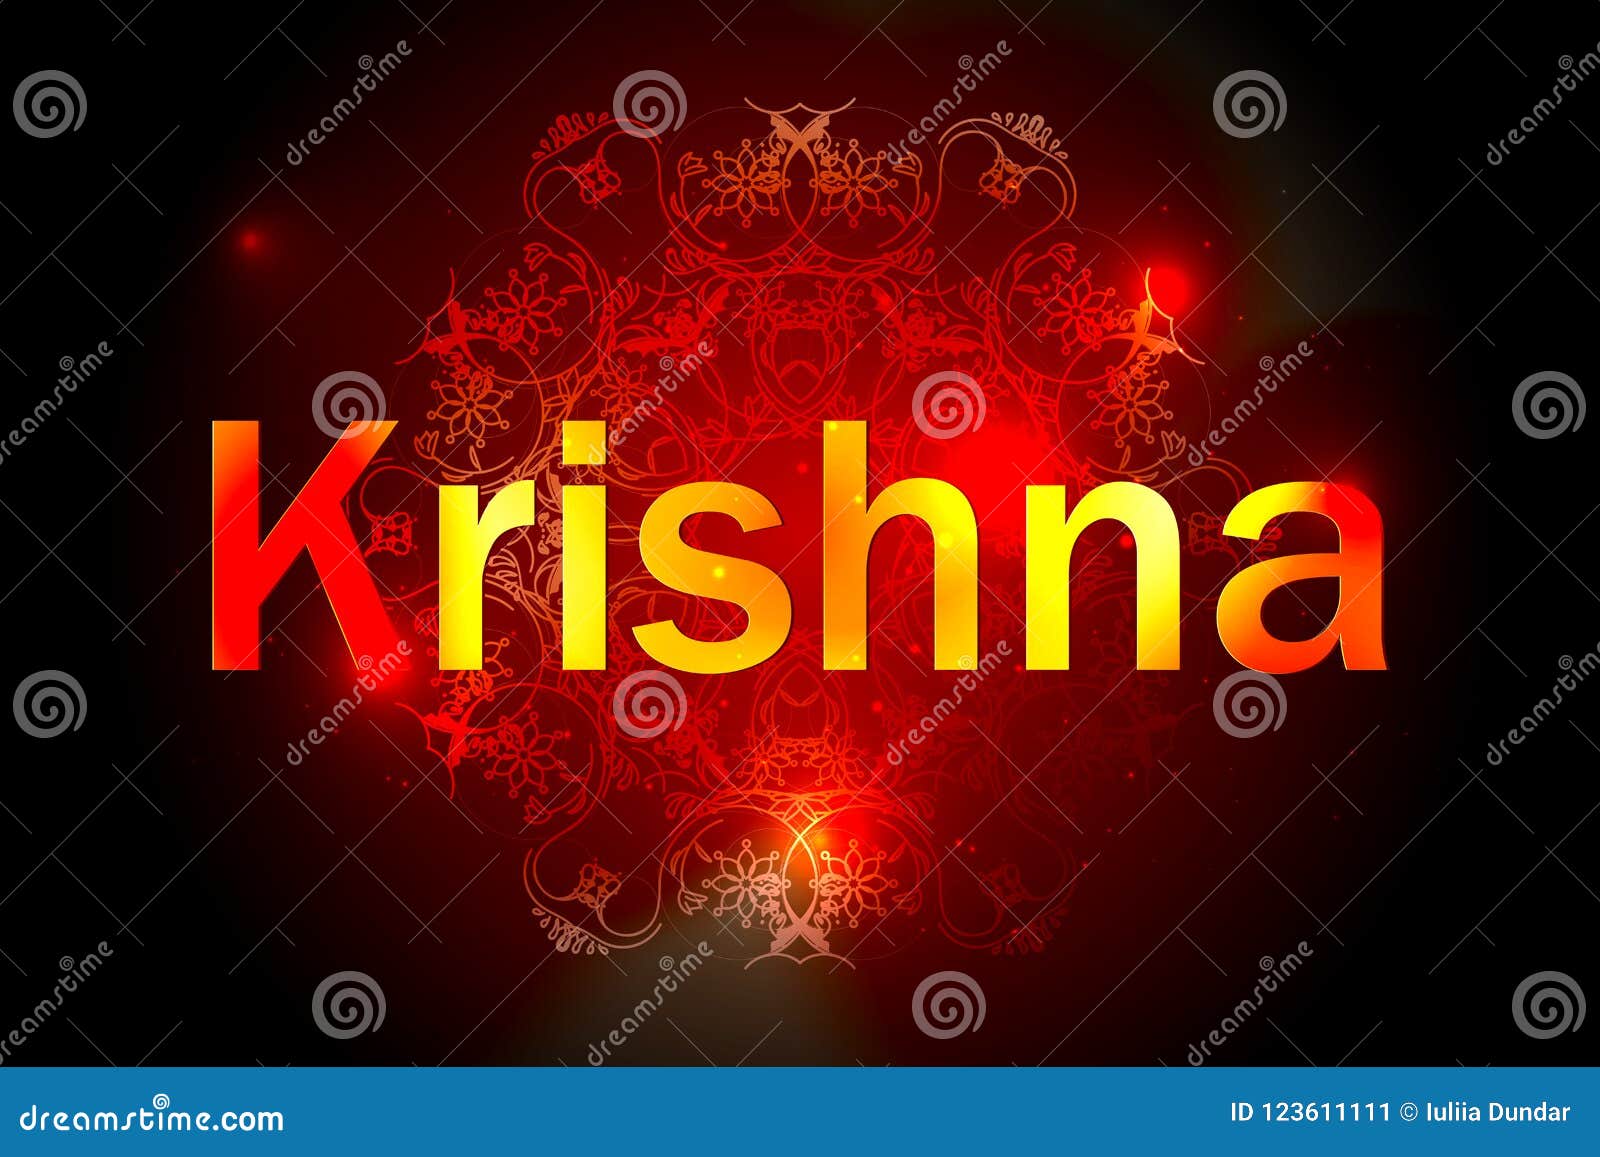 Hare krishna mantra hi-res stock photography and images - Alamy